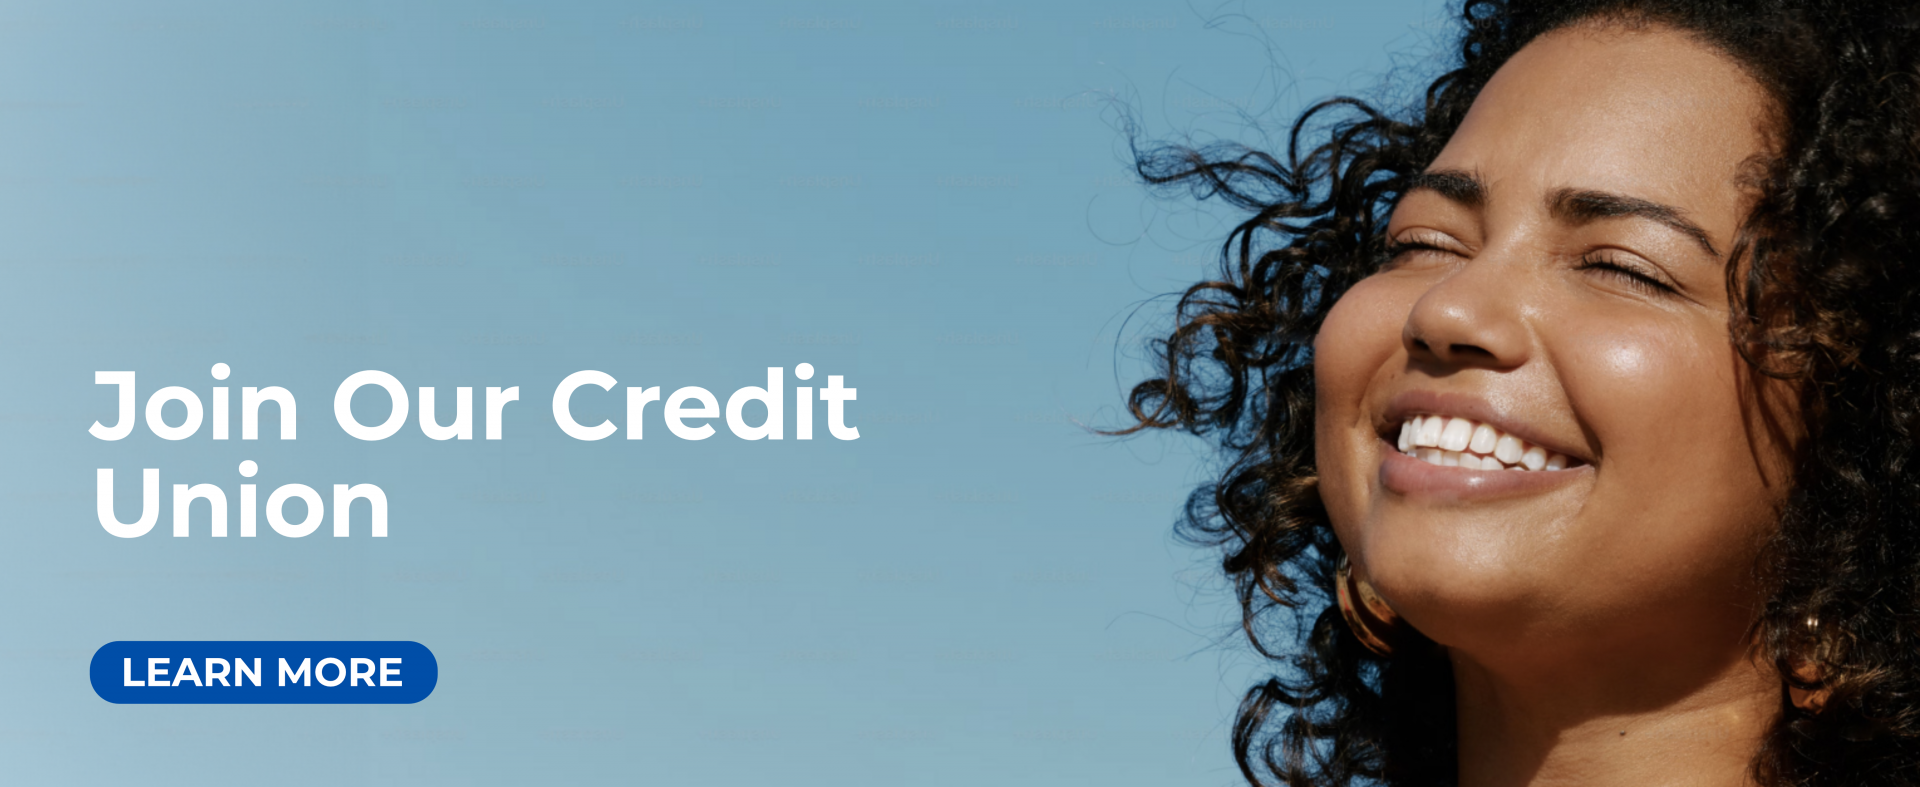 Join Our Credit Union